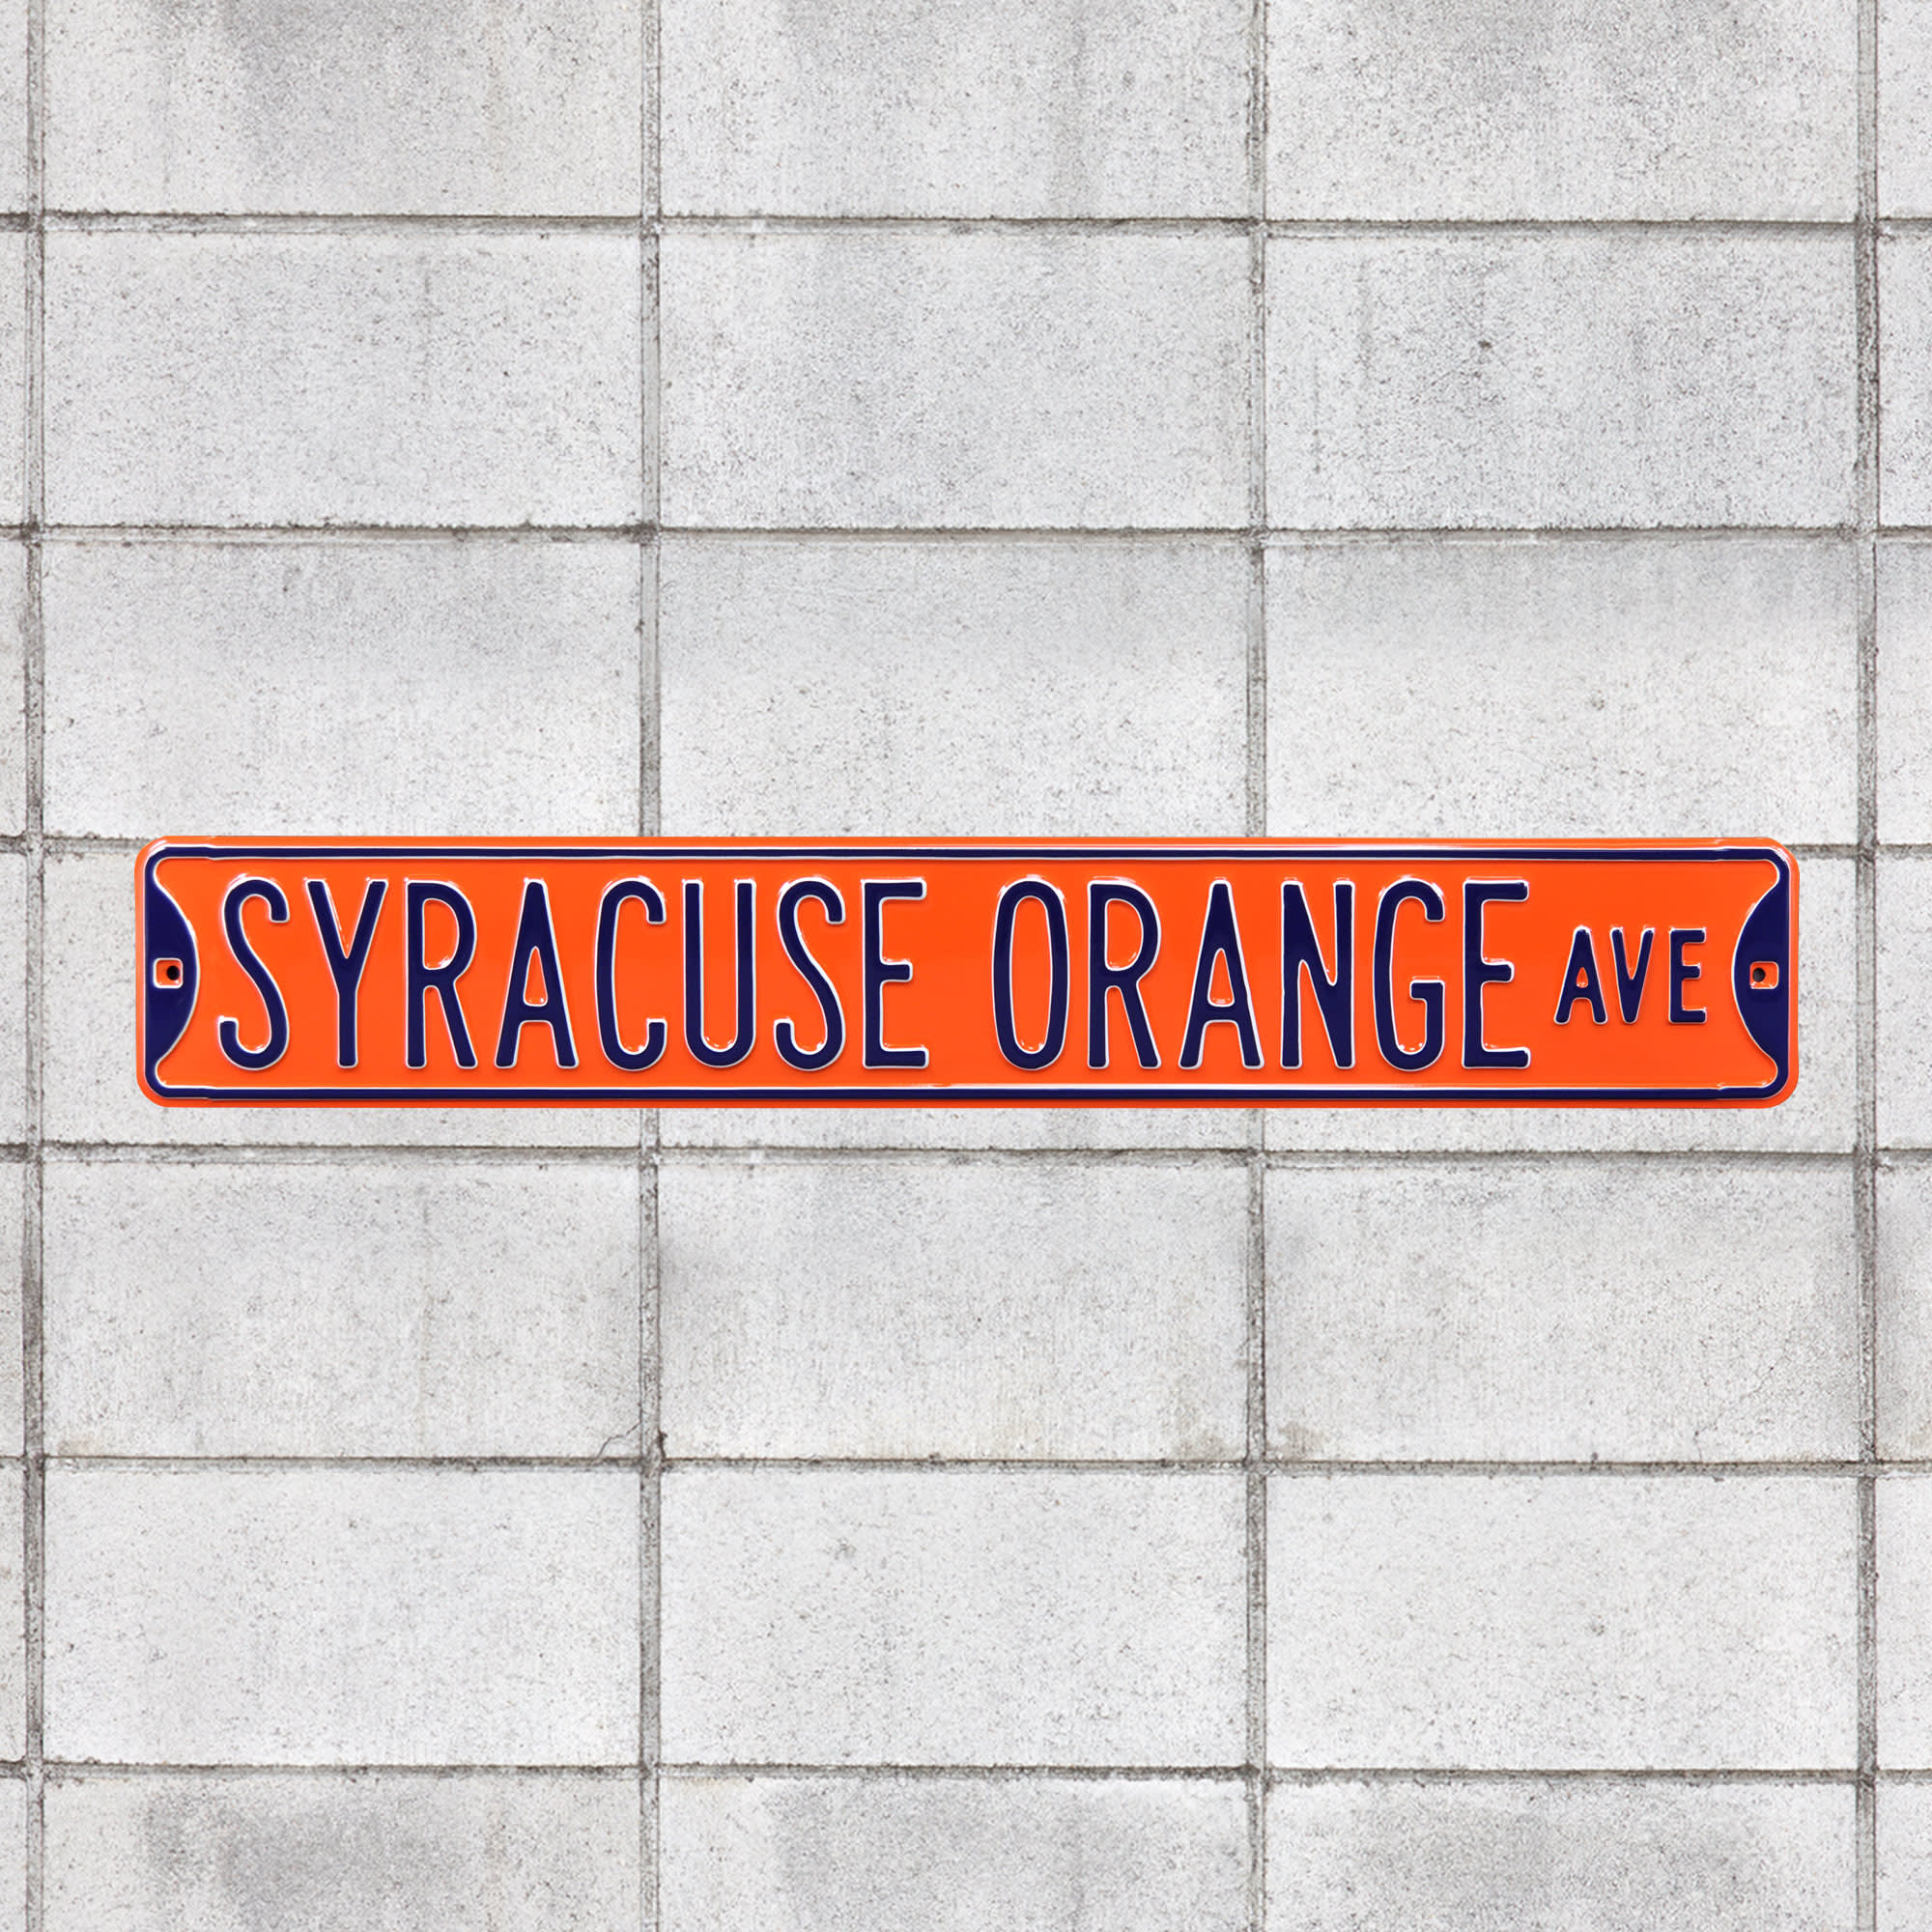 Syracuse Orange for Syracuse Orangemen: Syracuse Orange Avenue - Officially Licensed Metal Street Sign 36.0"W x 6.0"H by Fathead